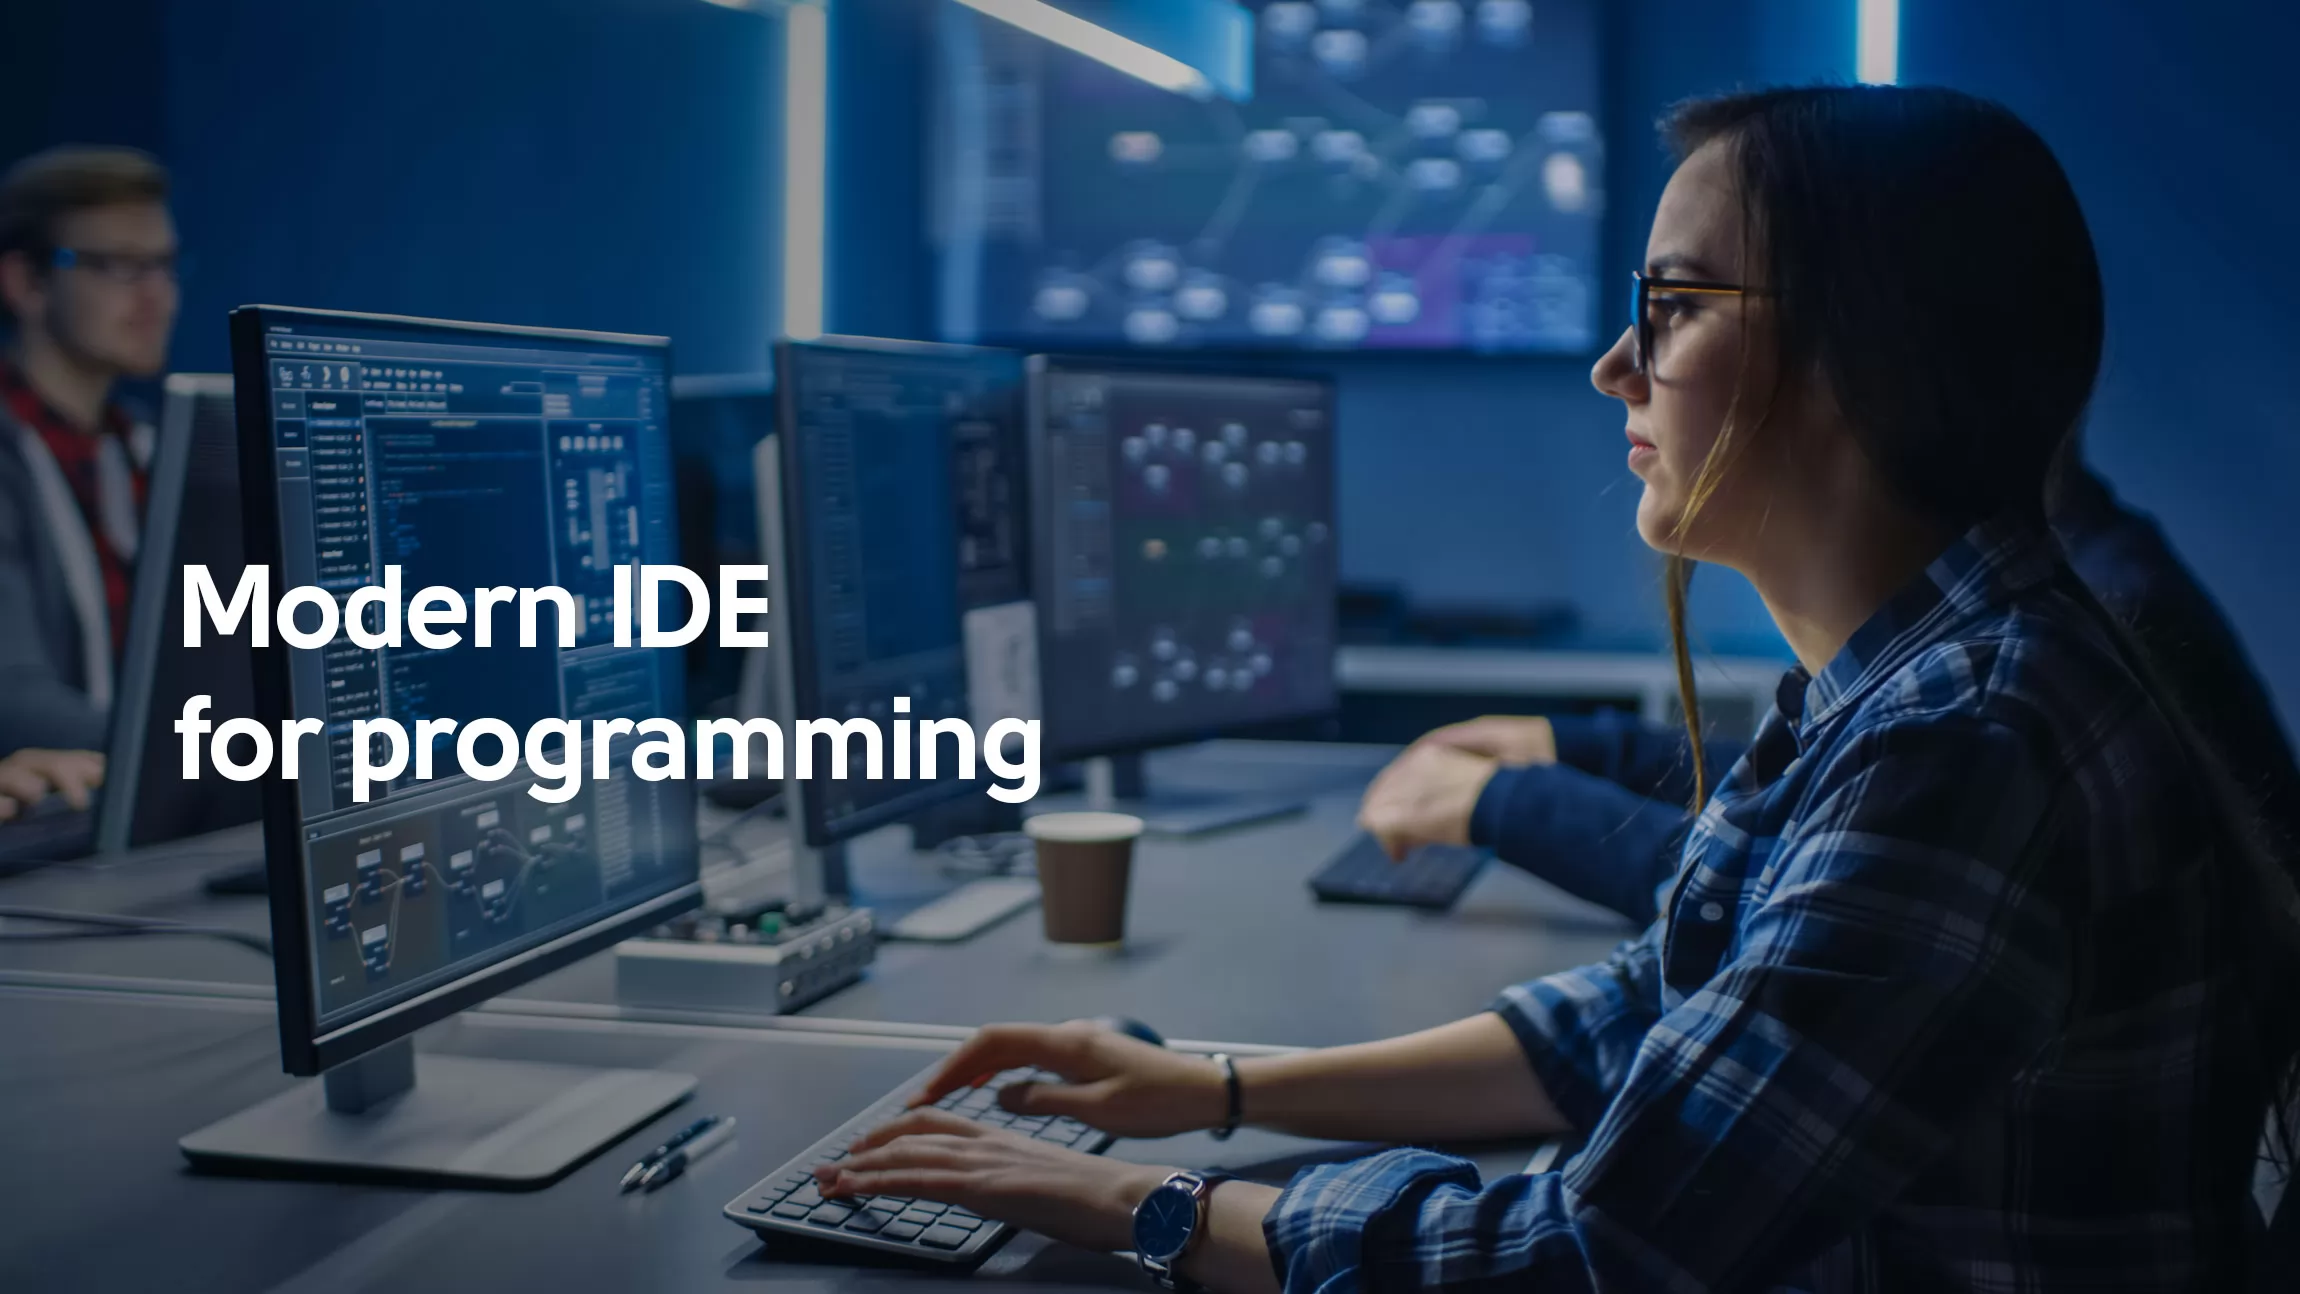 The Power of Integrated Development Environments (IDEs) in Software Development